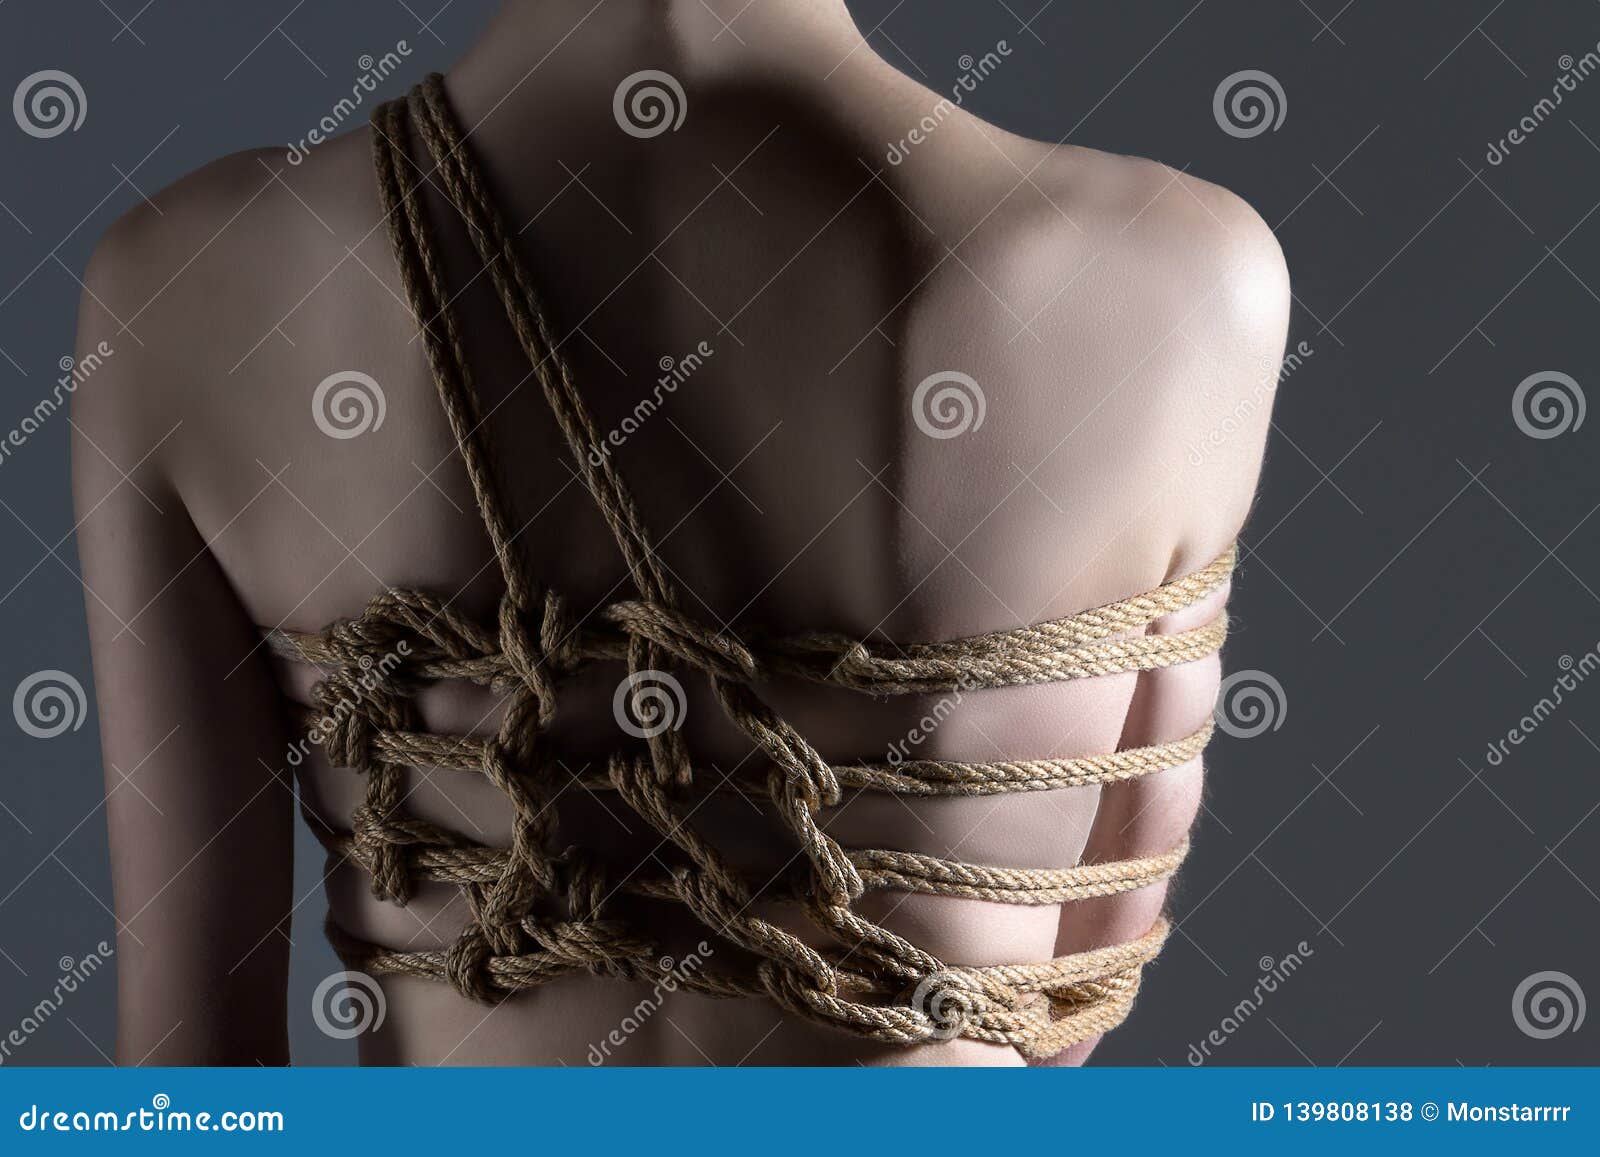 Woman in Art Bandage Tying with Rope Shibari Style pic